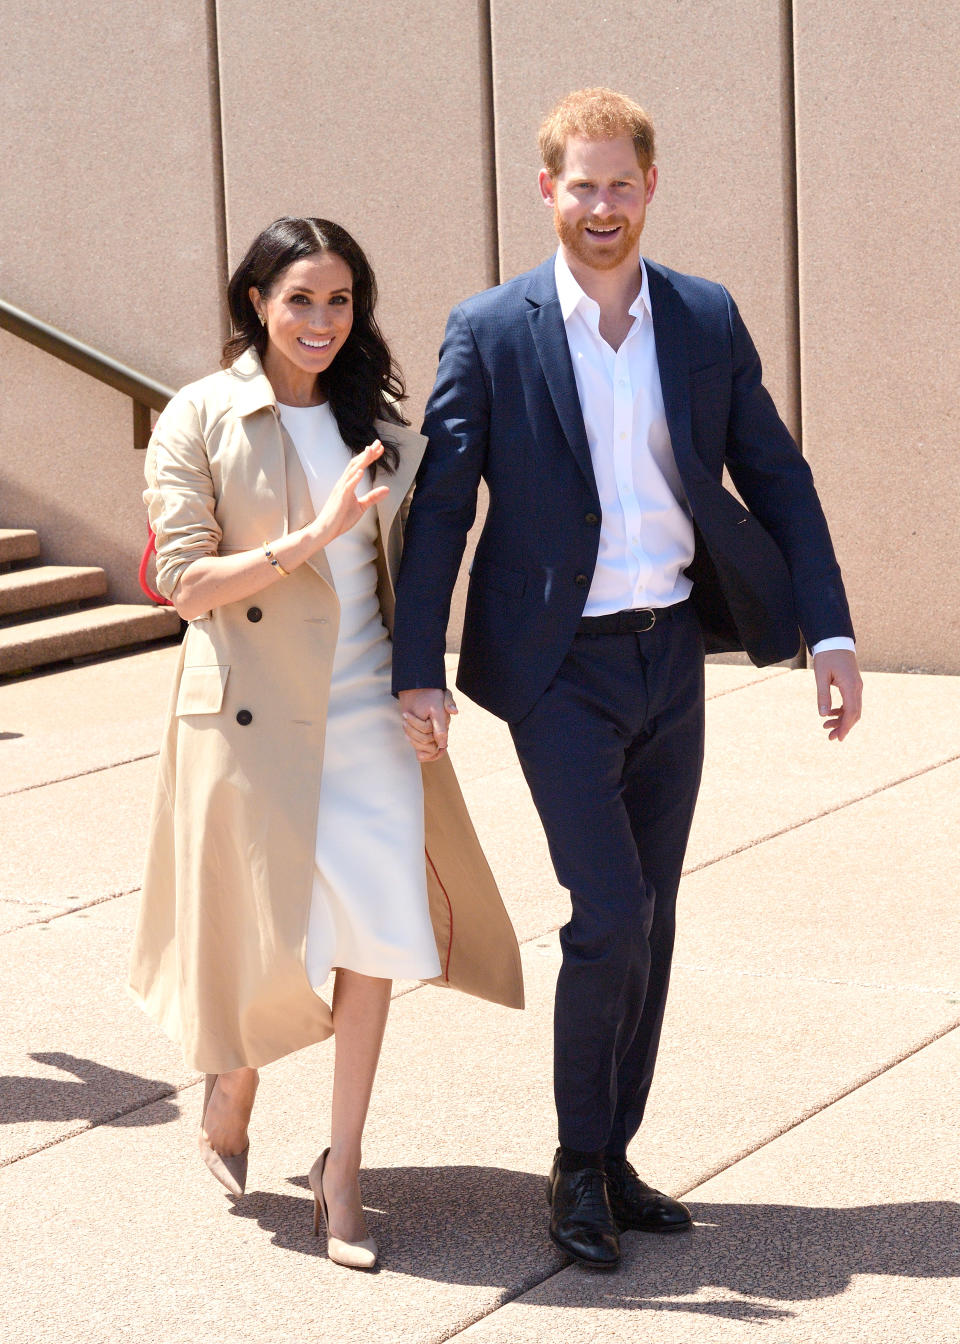 Prince Harry, Duke of Sussex and Meghan, Duchess of Sussex meet members of the public outside the Sydney Opera House on October 16, 2018 